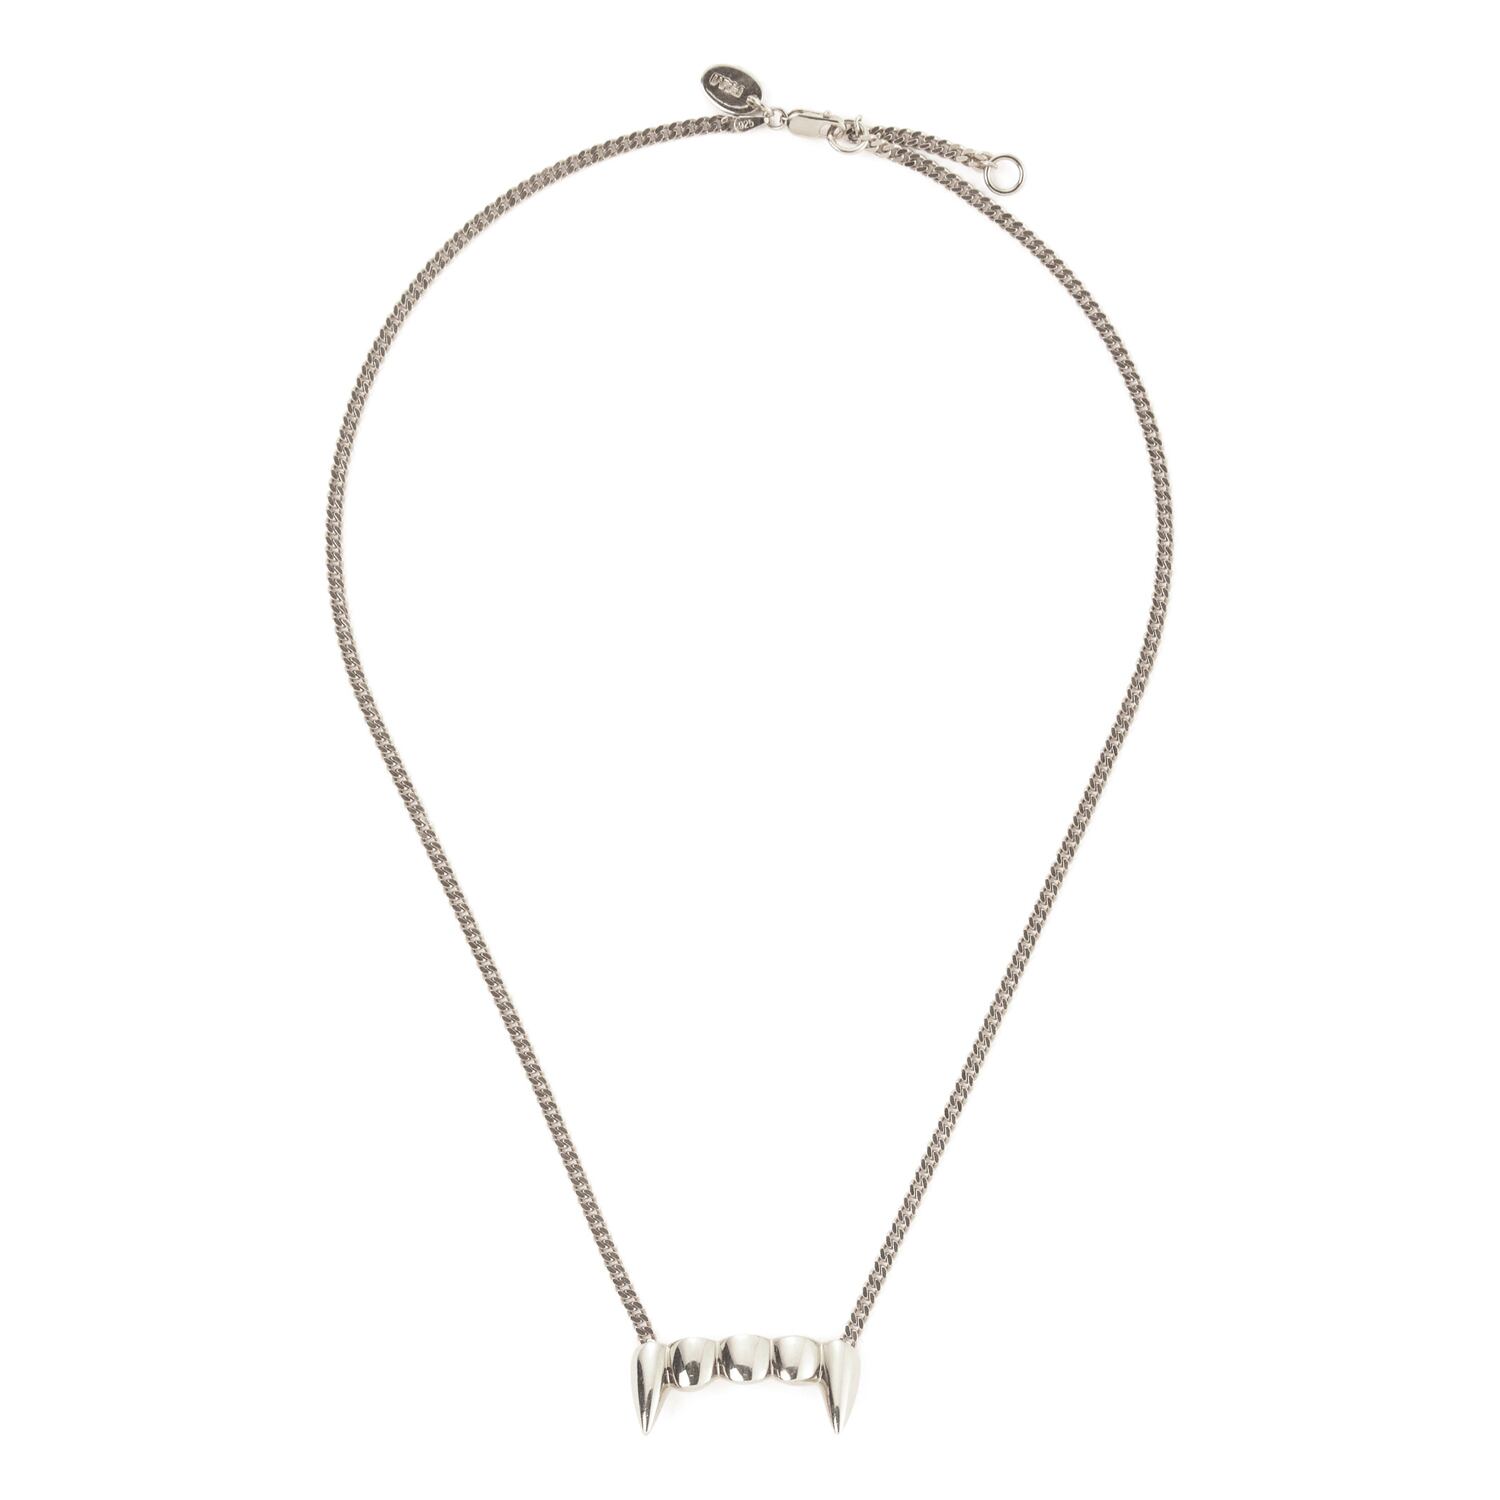 PAM FANG NECKLACE 新品未使用